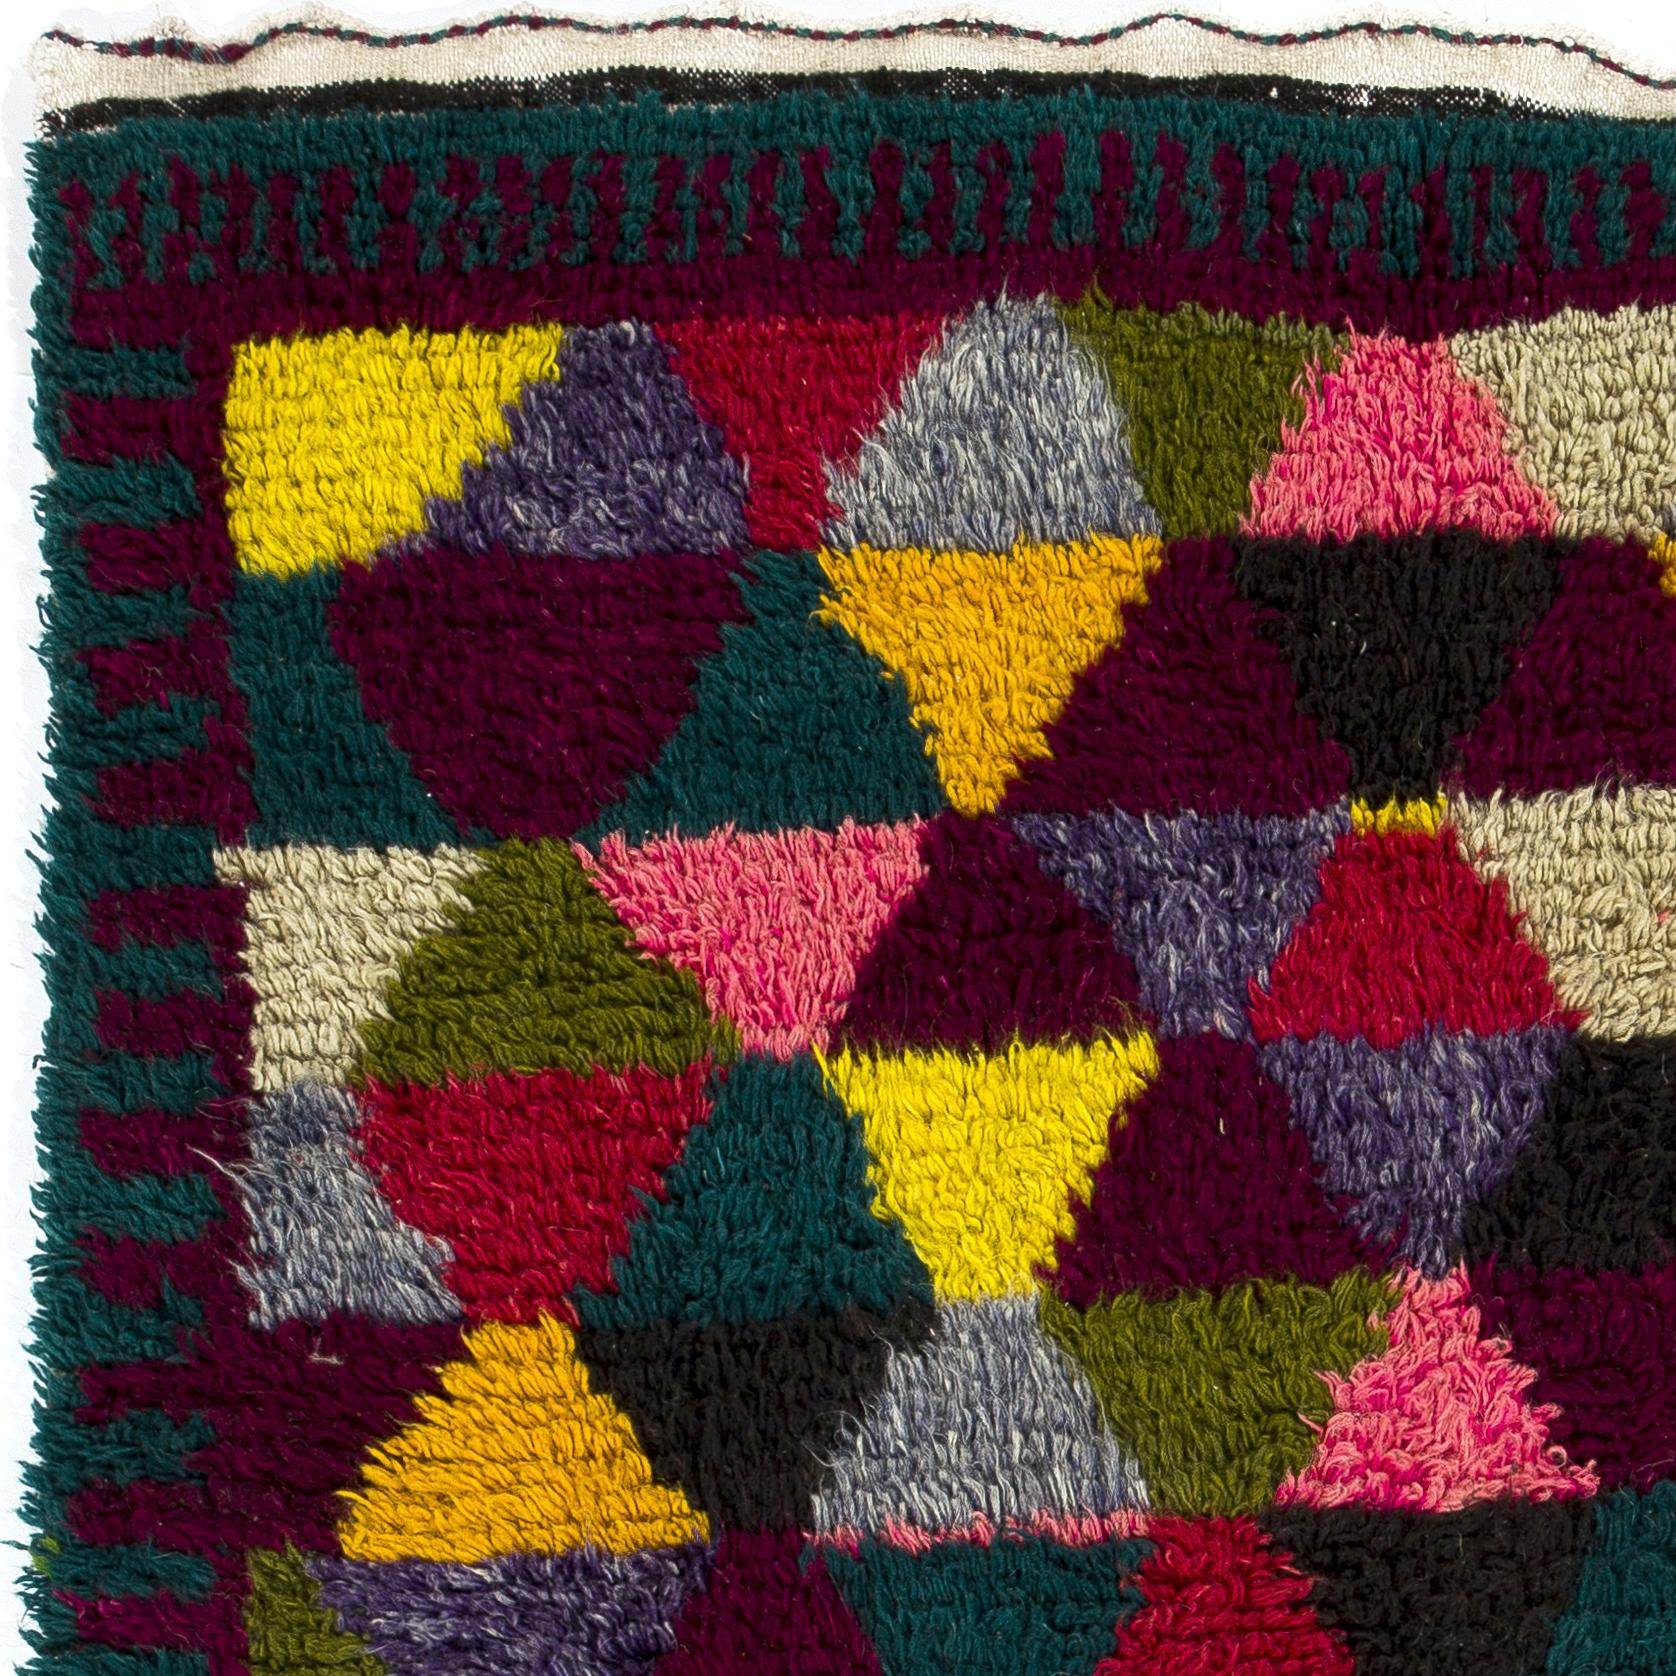 Modern 4.2x5.5 Ft Vibrant Handmade Tulu Rug. Soft Cozy Wool Pile. Vintage Wall Hanging For Sale